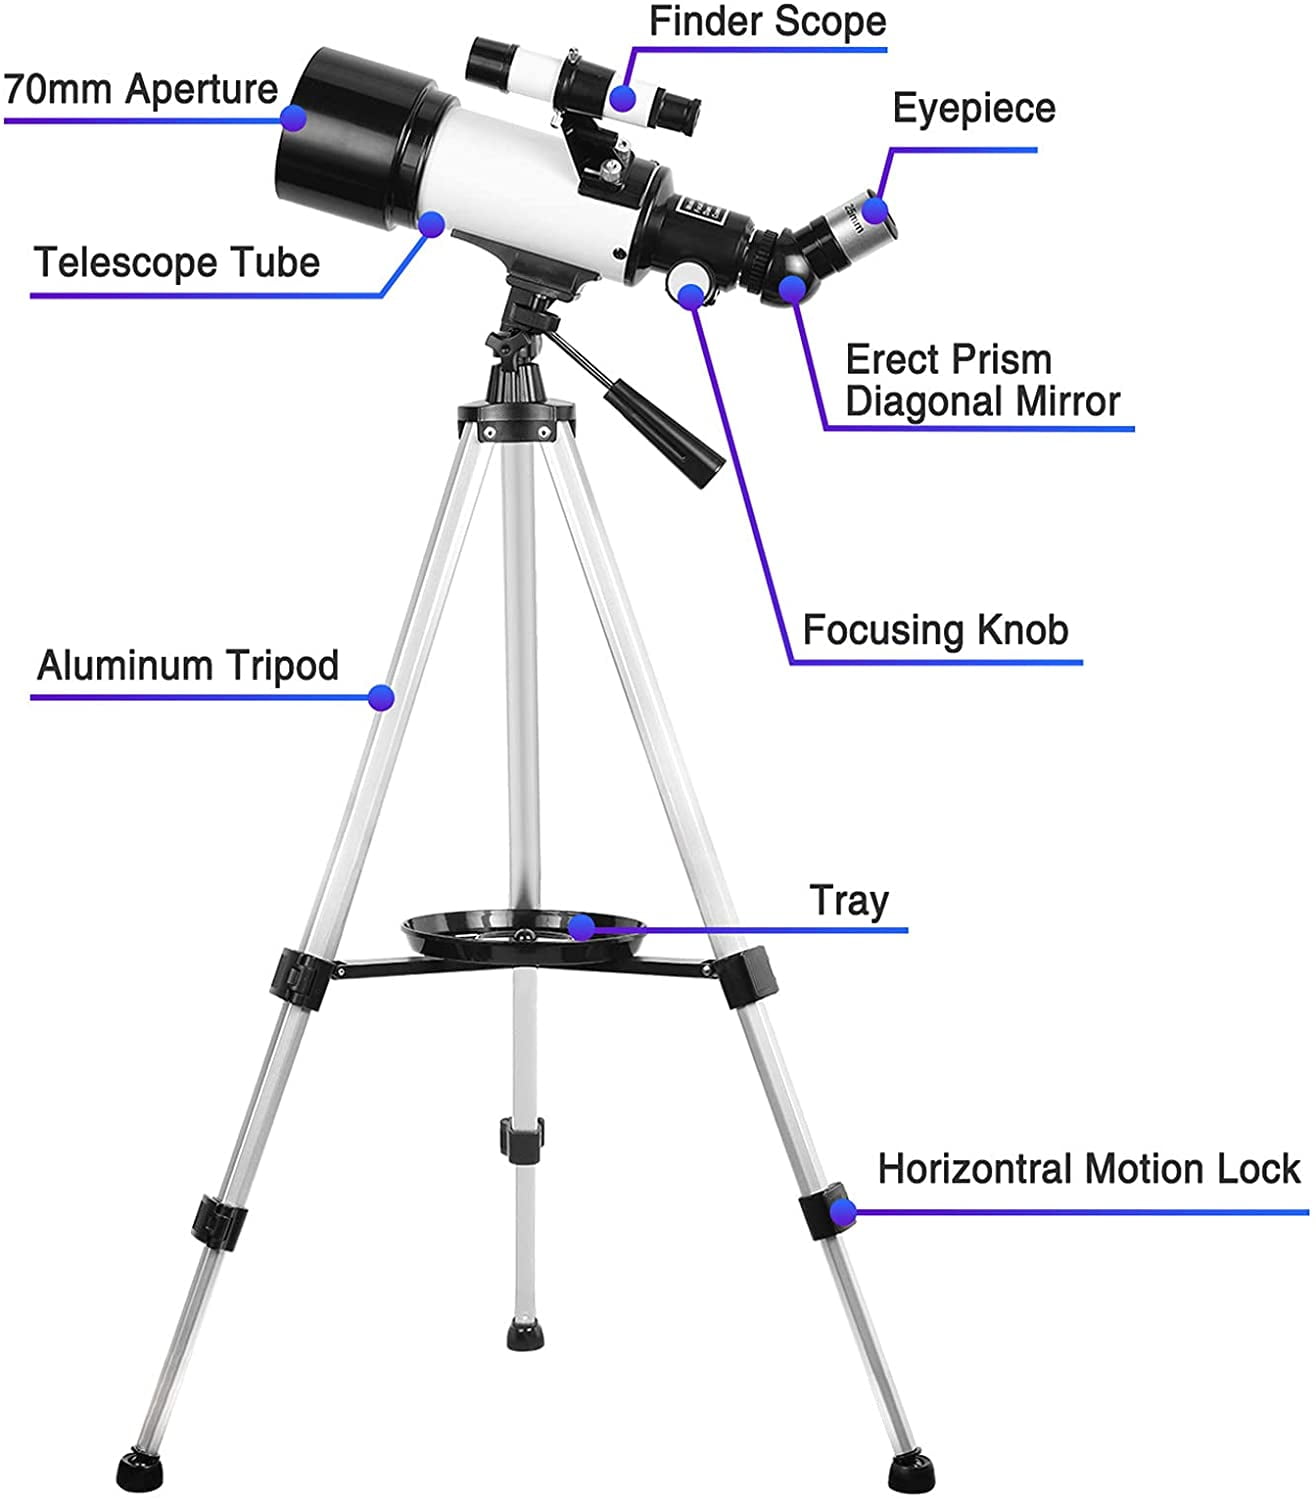 489 Astronomy Telescopes for Beginners & Kids 57mm Aperture Telescope Child Catadioptric Reflectors Monoculars Astronomical Refractors Portable Travel Refractor with Tripod 